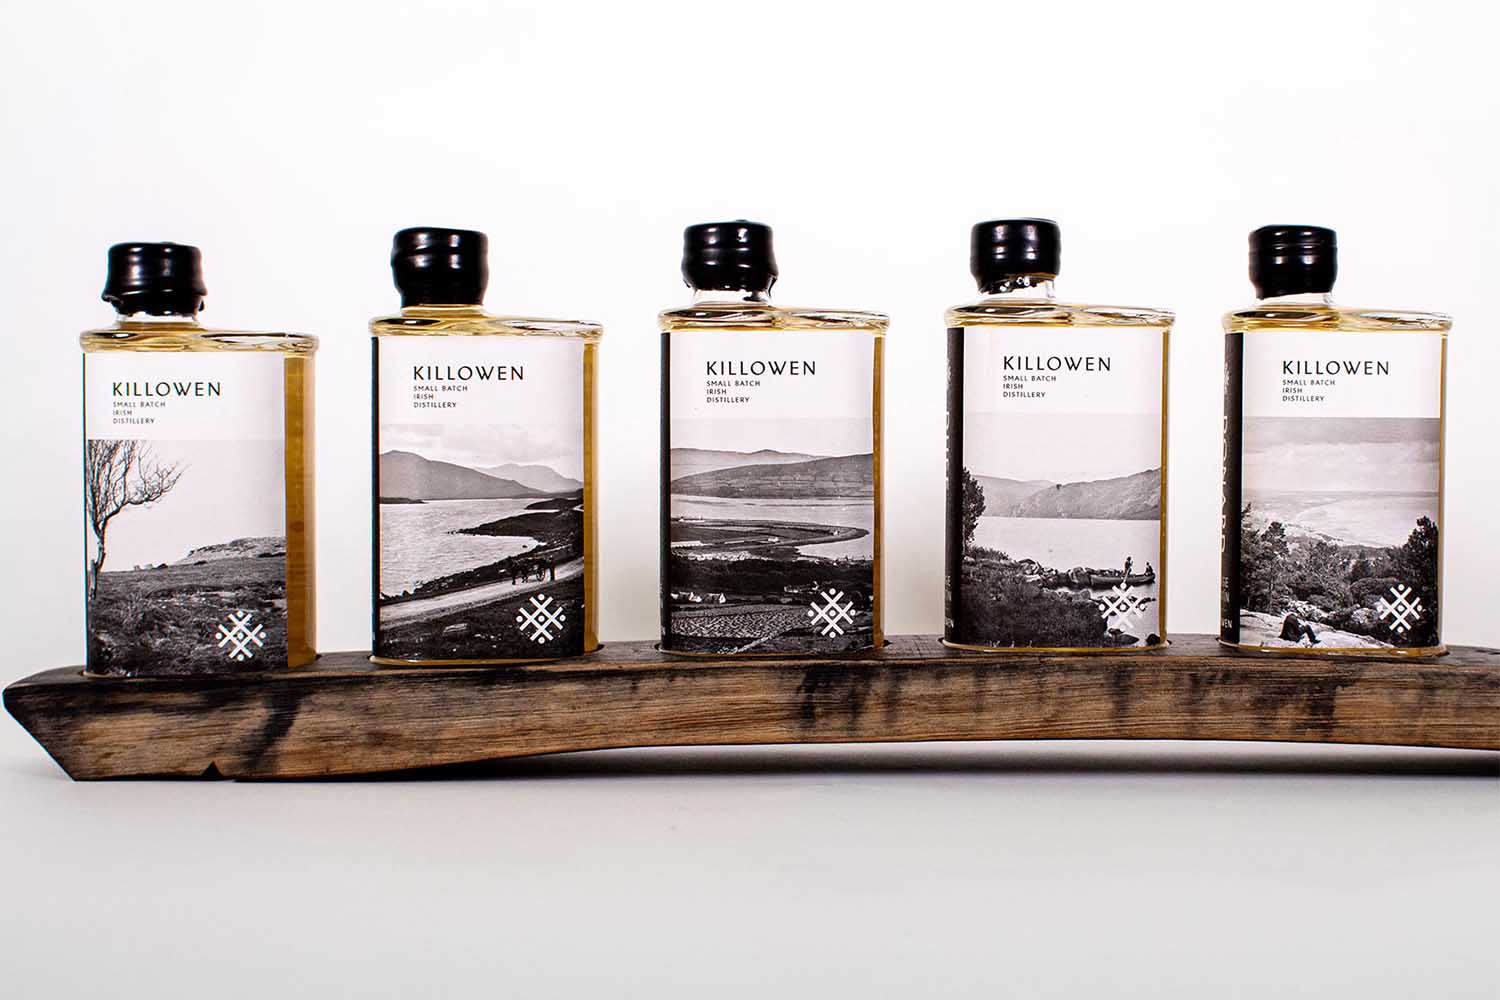 Killowen's wood seasoning experiment combines their poitín with five beers from Ireland’s bygone Cuige (provinces), 